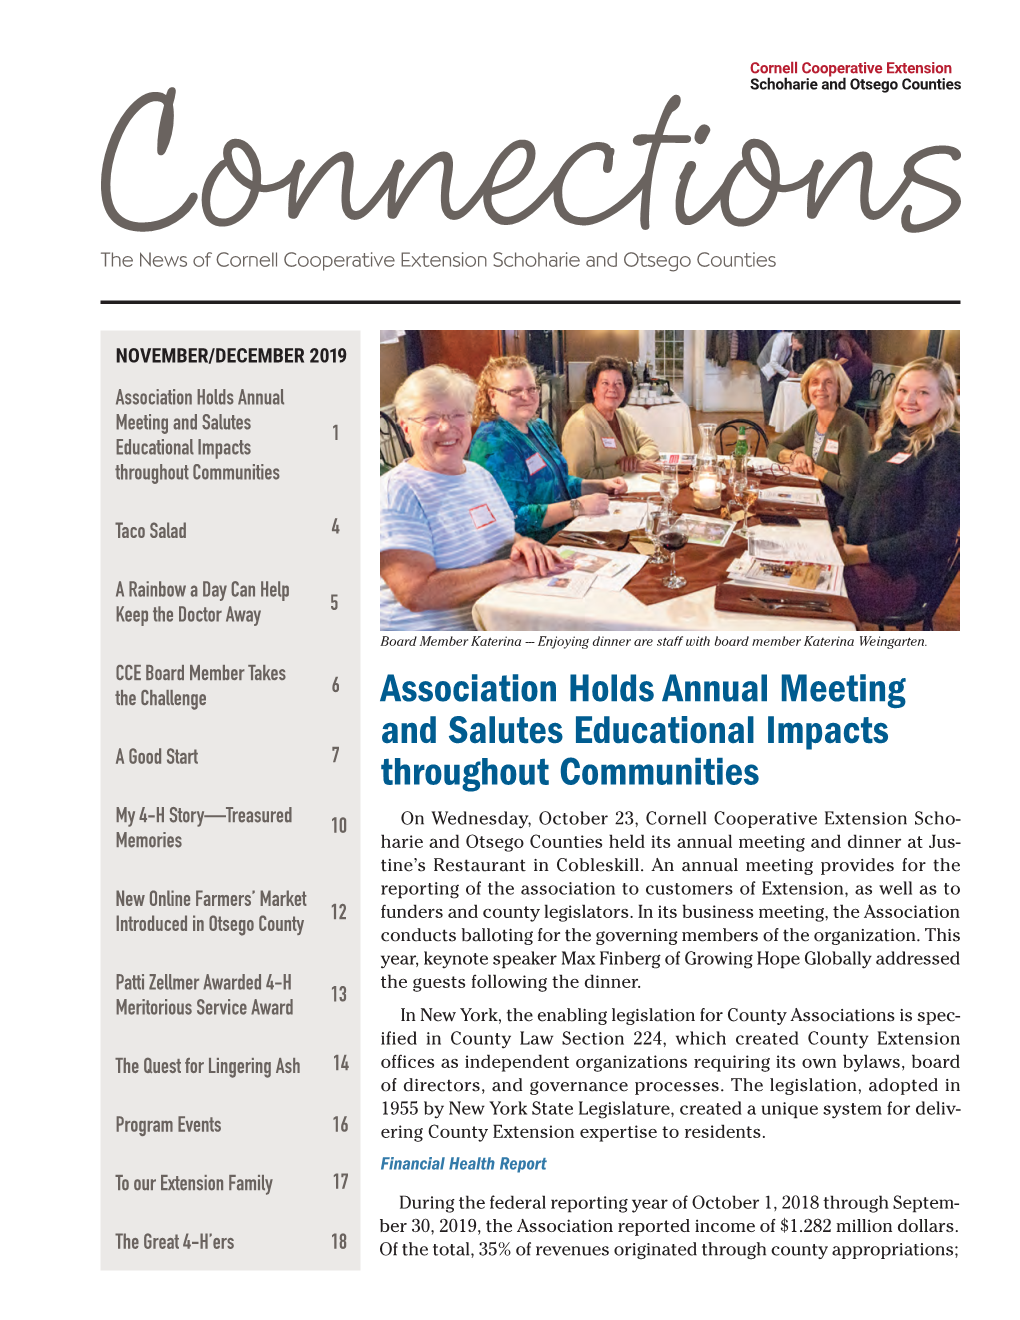 Connections—The News of Cornell Cooperative Extension Schoharie and Otsego Counties Year Term